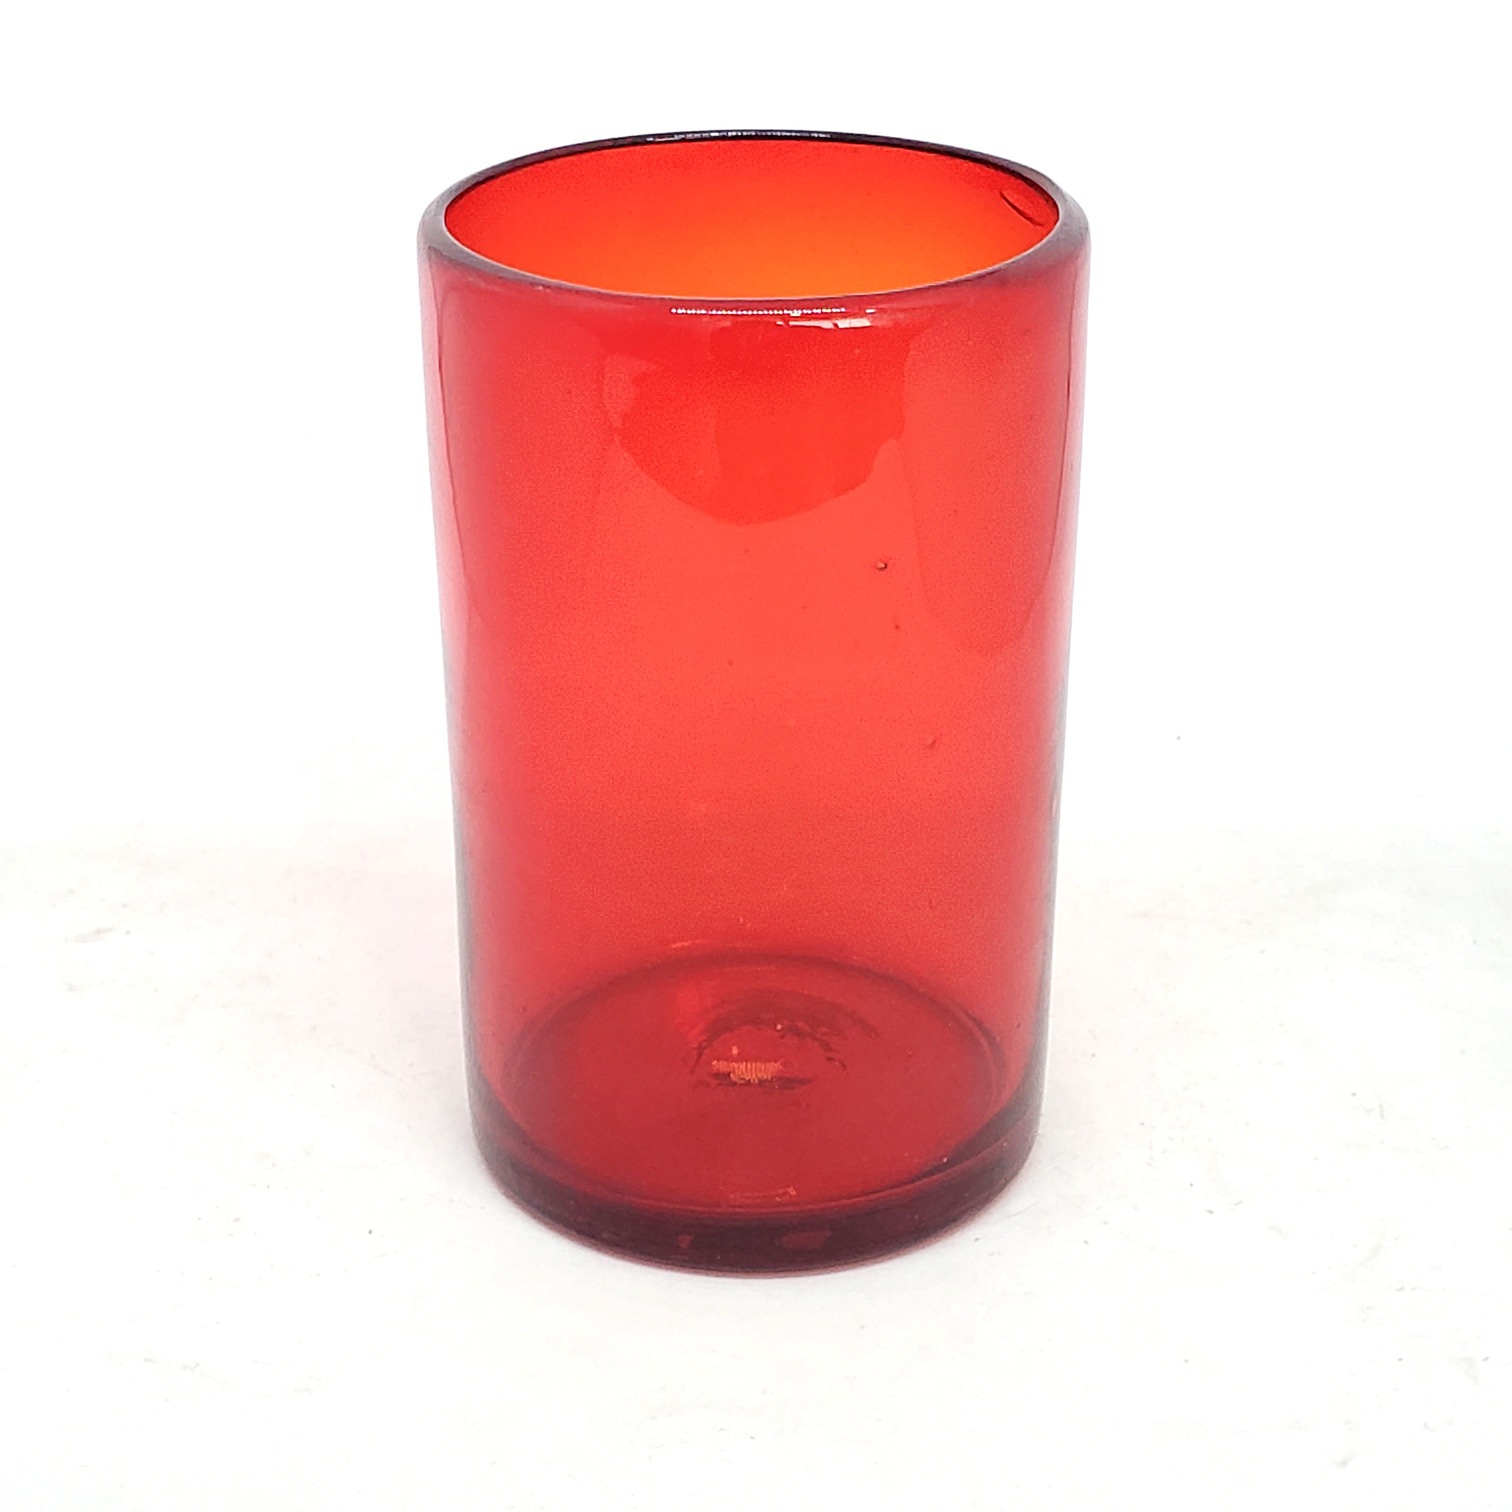 Sale Items / Solid Ruby Red 14 oz Drinking Glasses (set of 6) / These handcrafted glasses deliver a classic touch to your favorite drink.